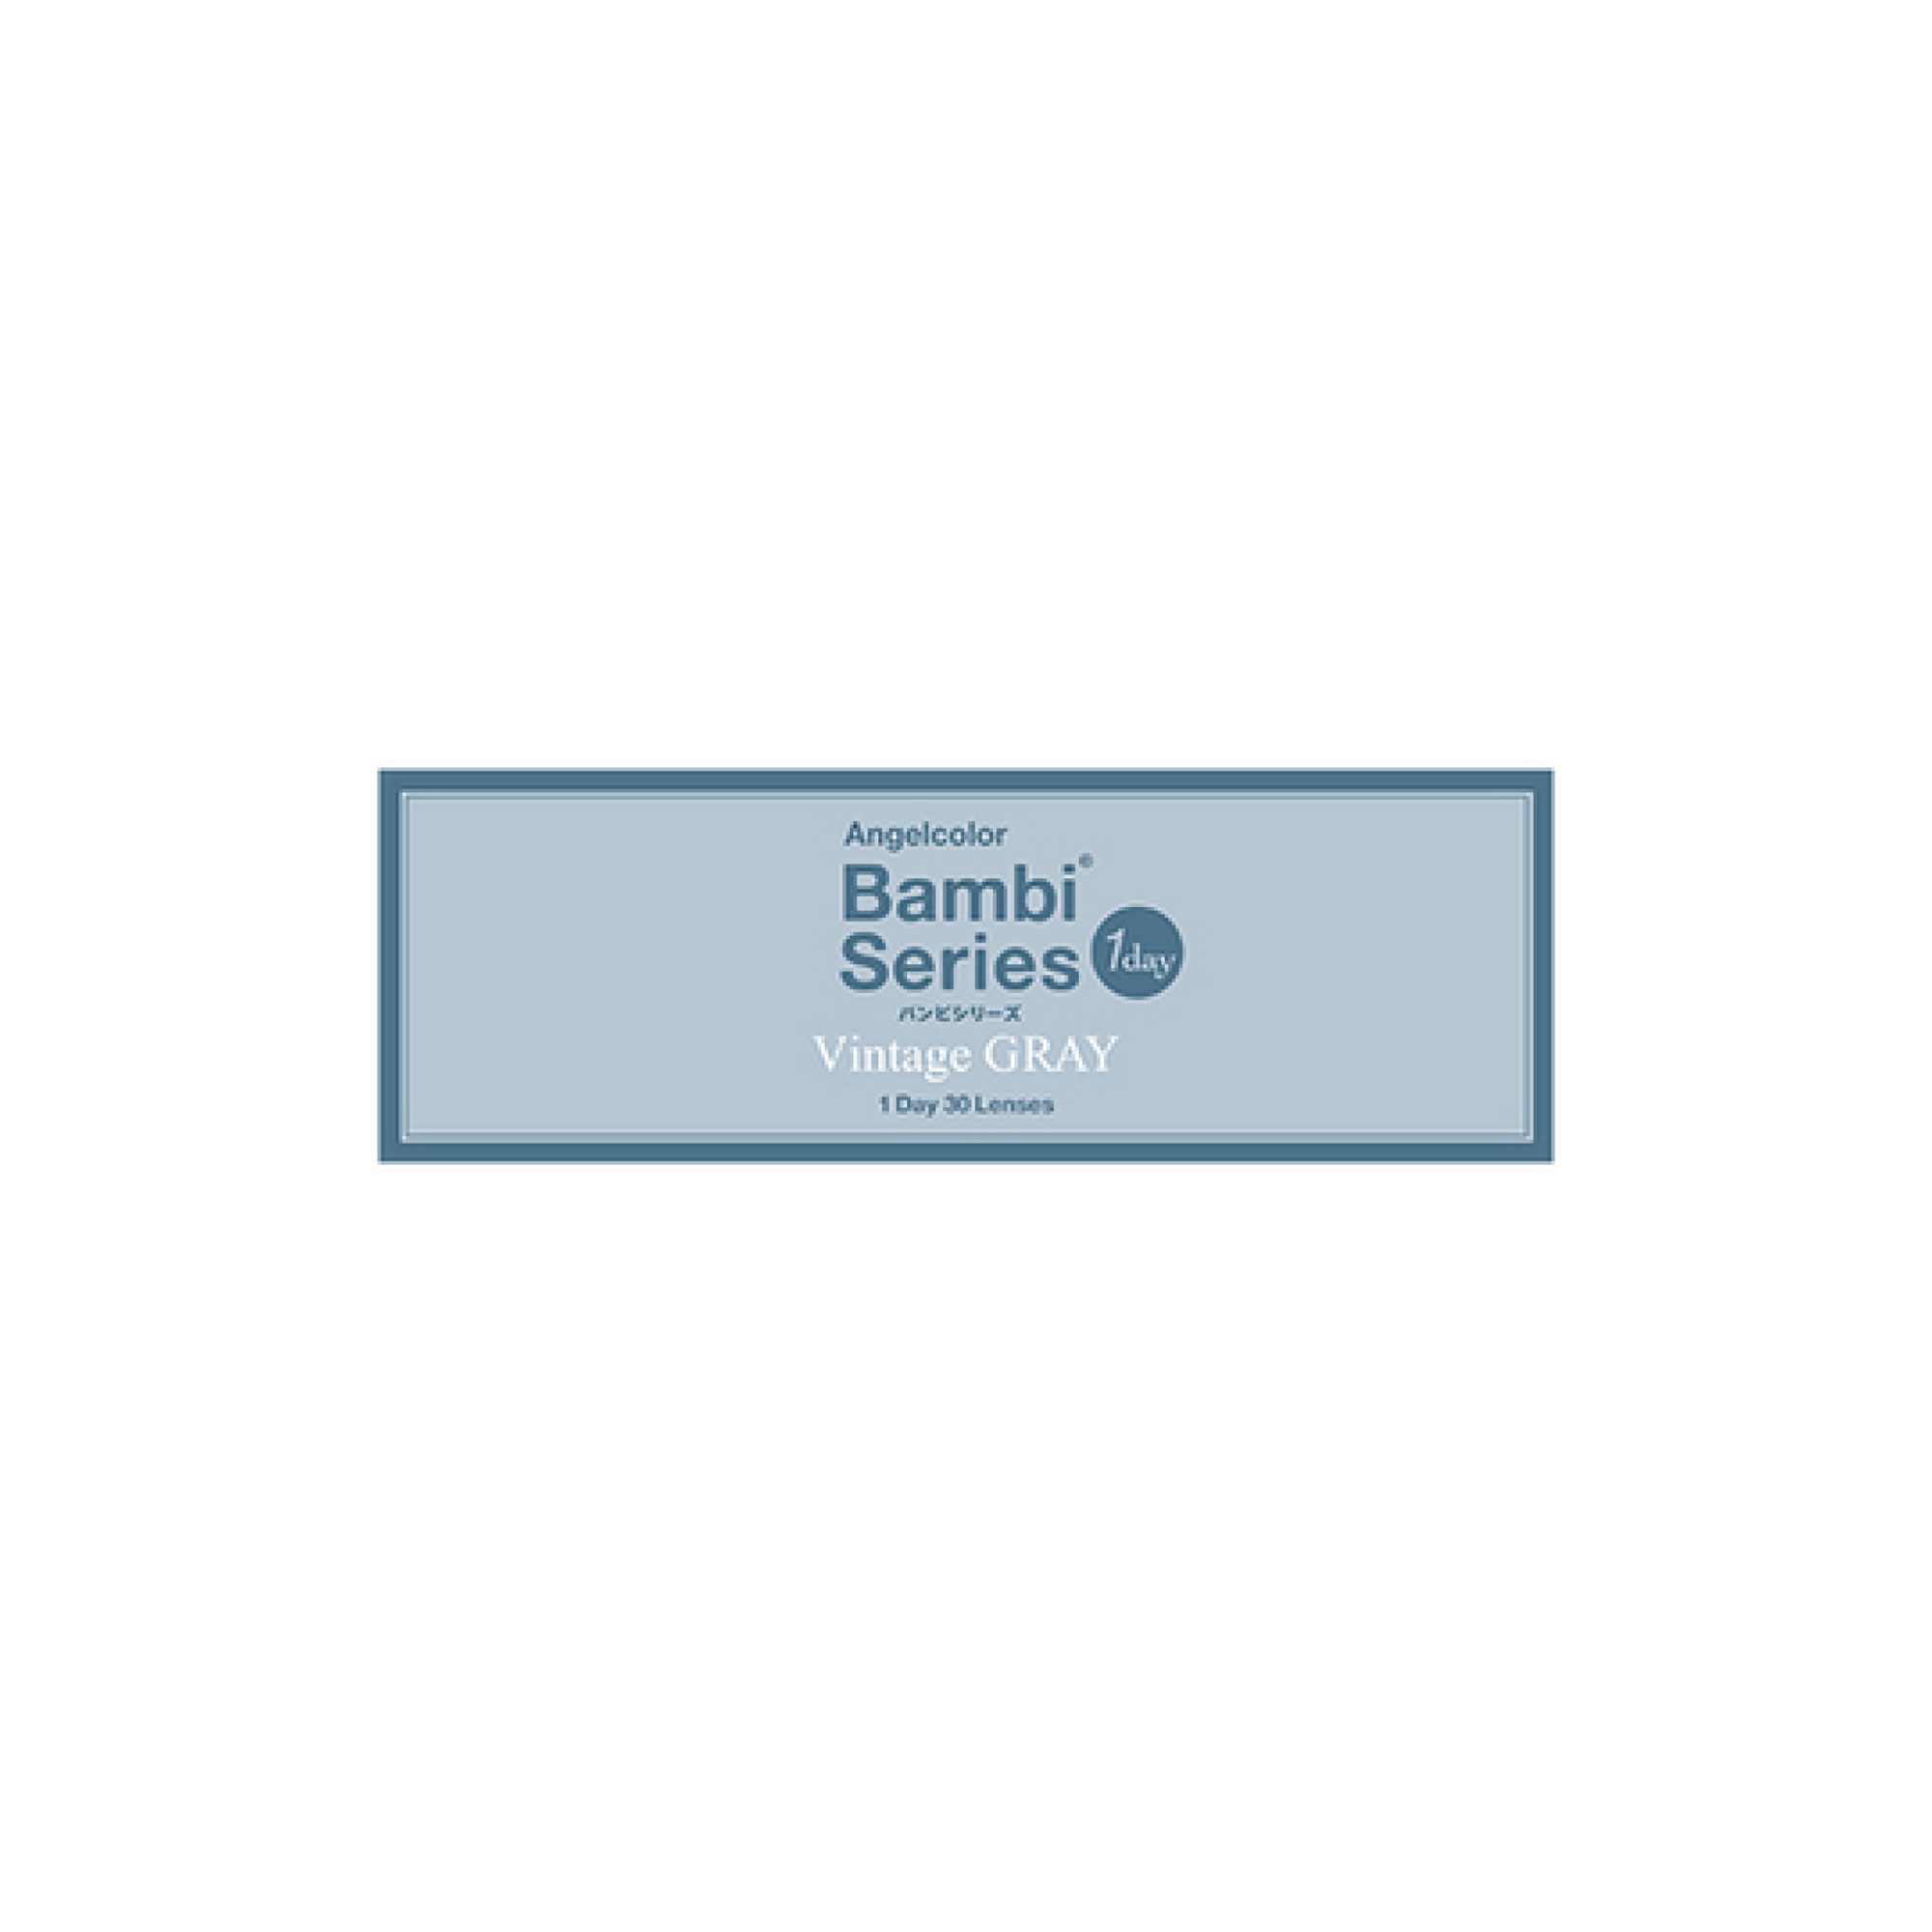 Bambi series 1-Day color contact lens #Vintage gray日抛美瞳复古灰｜10 Pcs